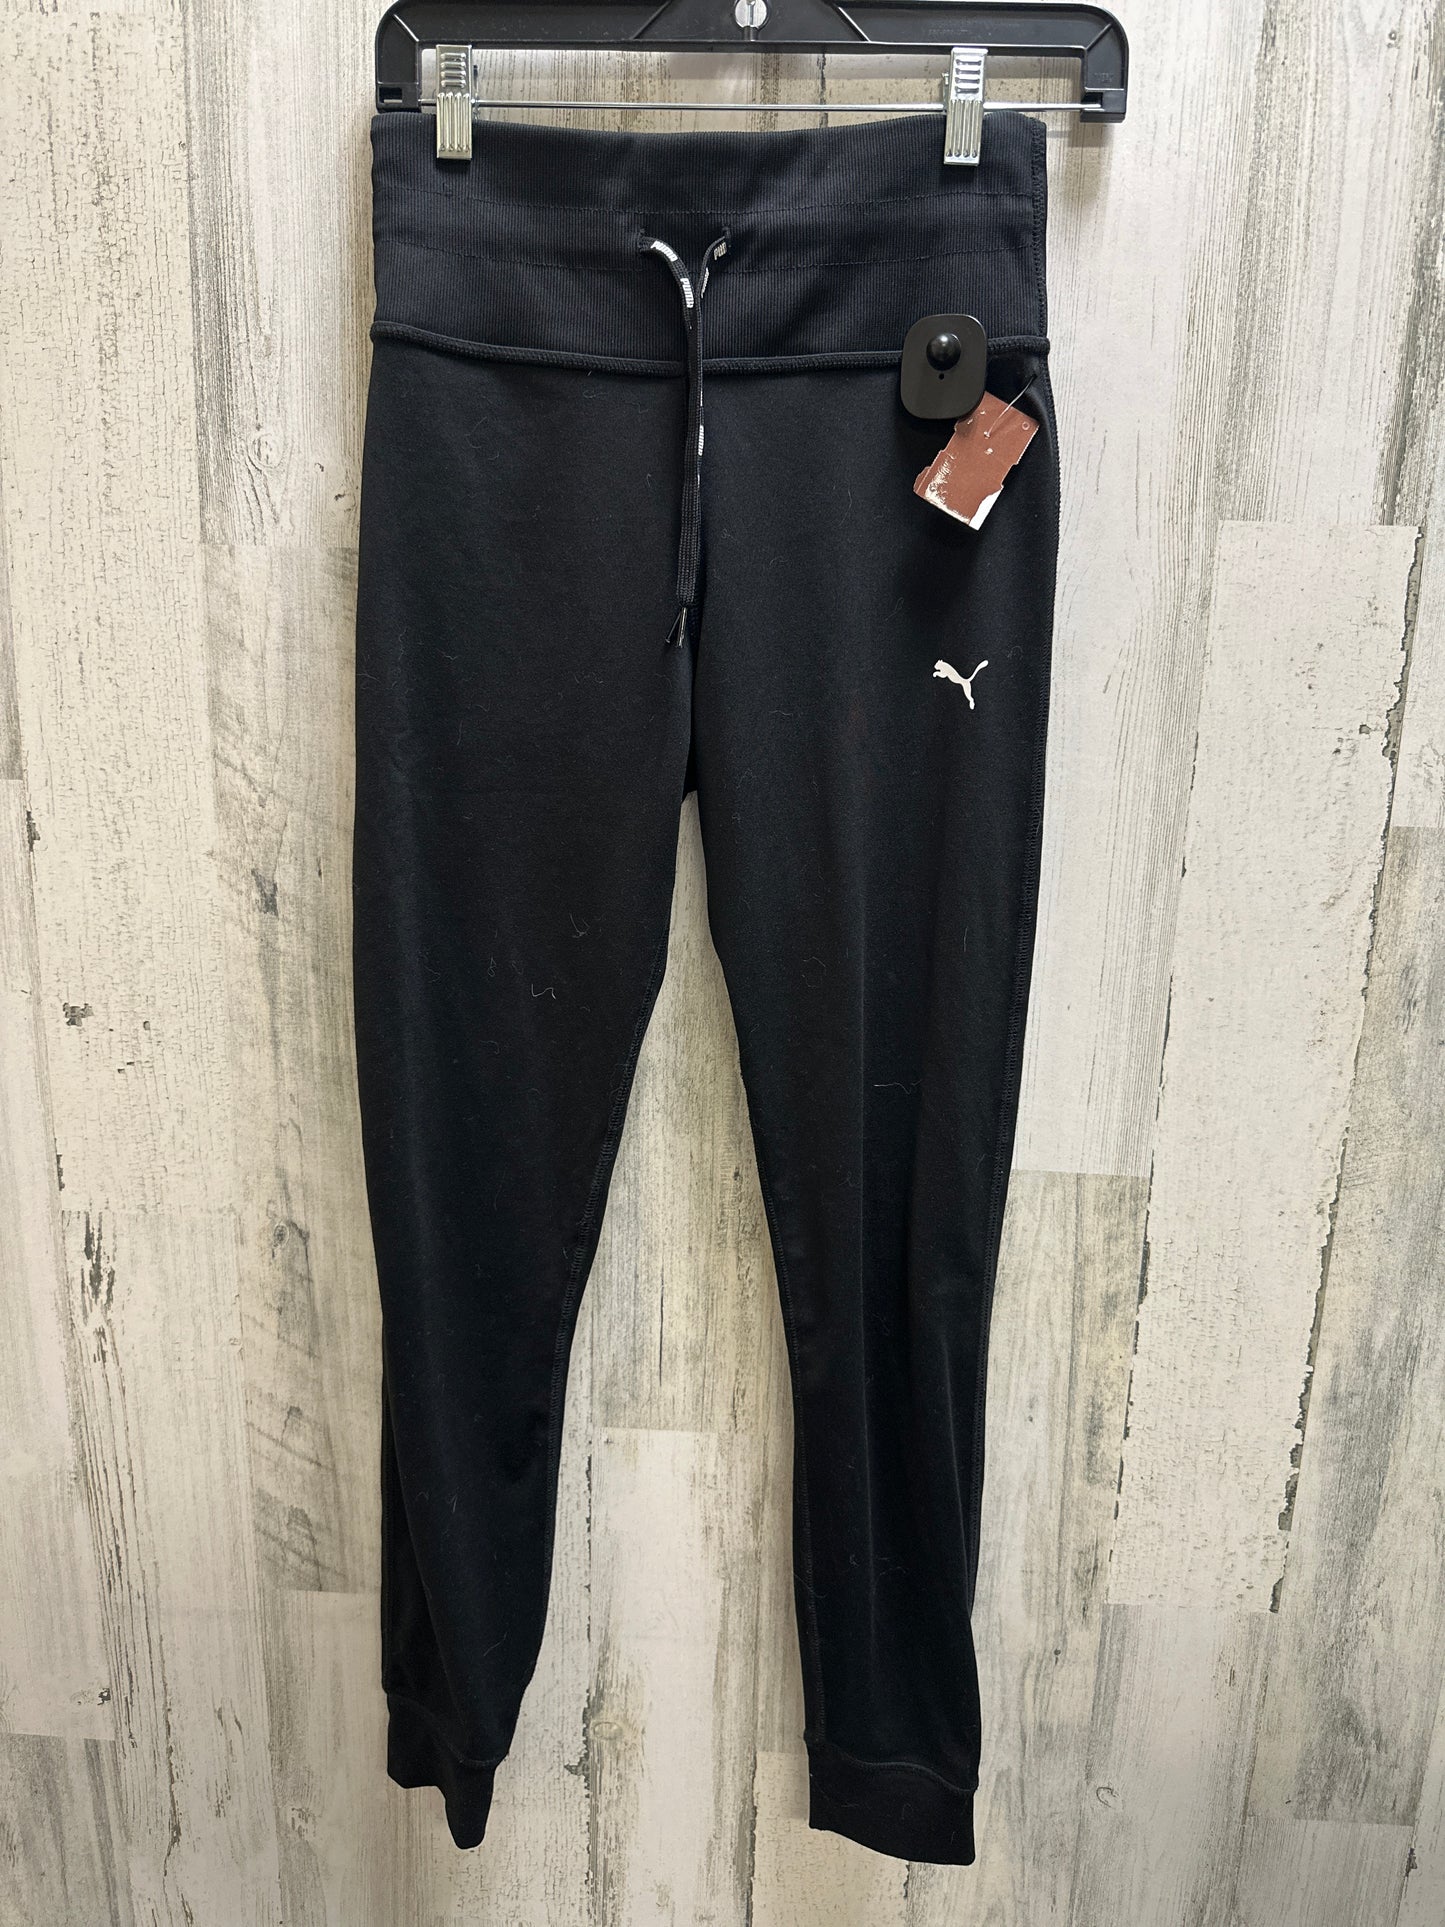 Athletic Pants By Puma  Size: S